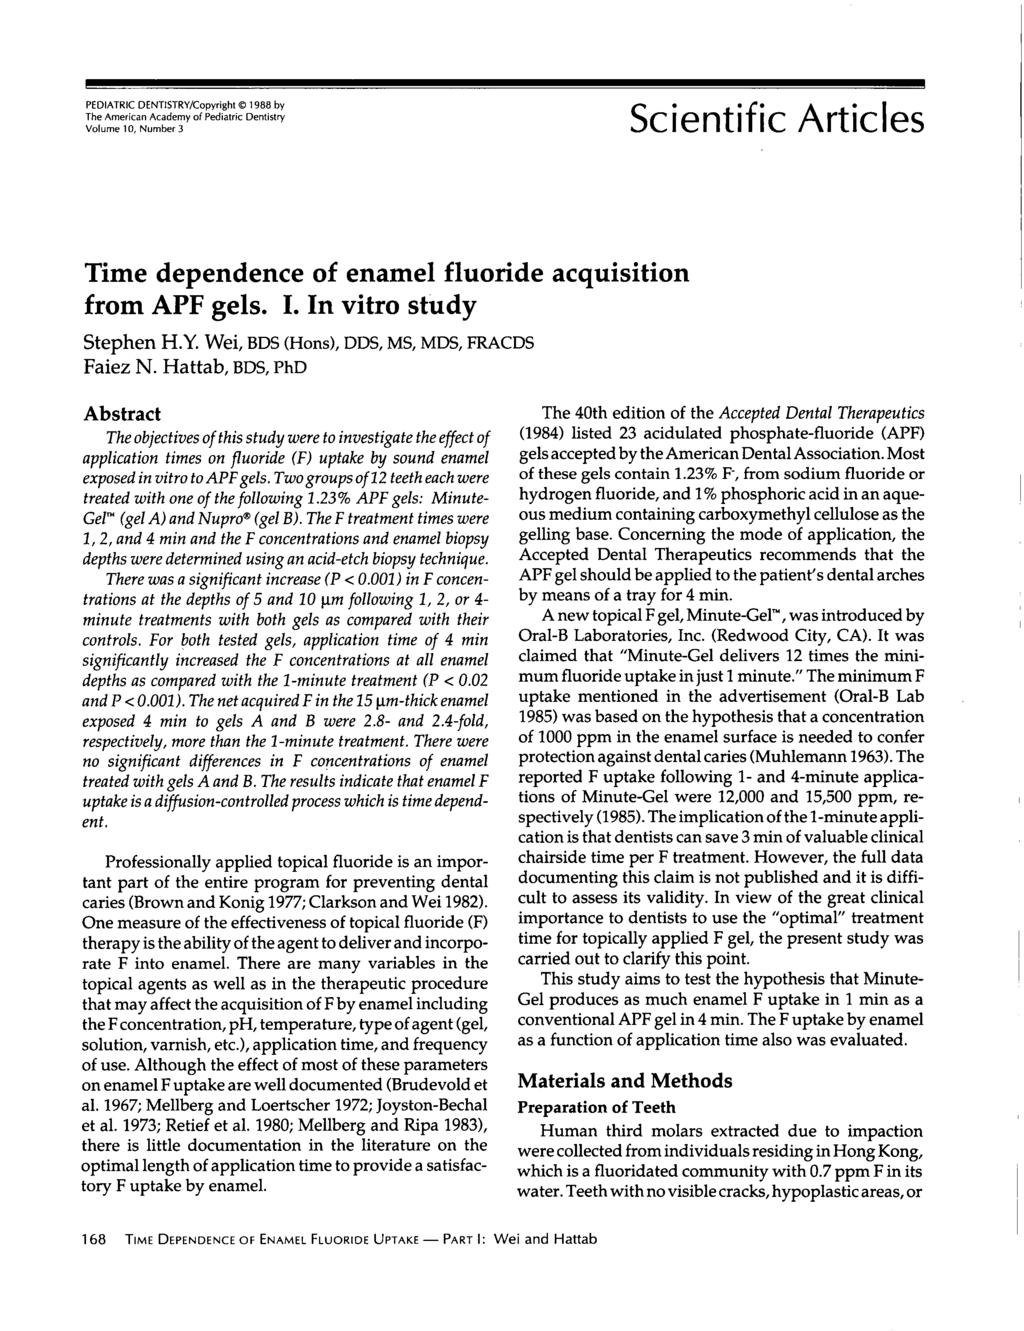 PEDIATRIC DENTISTRY/Copyright 1988 by The American Academy o Pediatric Dentistry Volume 10, Number 3 ScientificArtic Time dependence of enamel fluoride acquisition from APF gels. I.